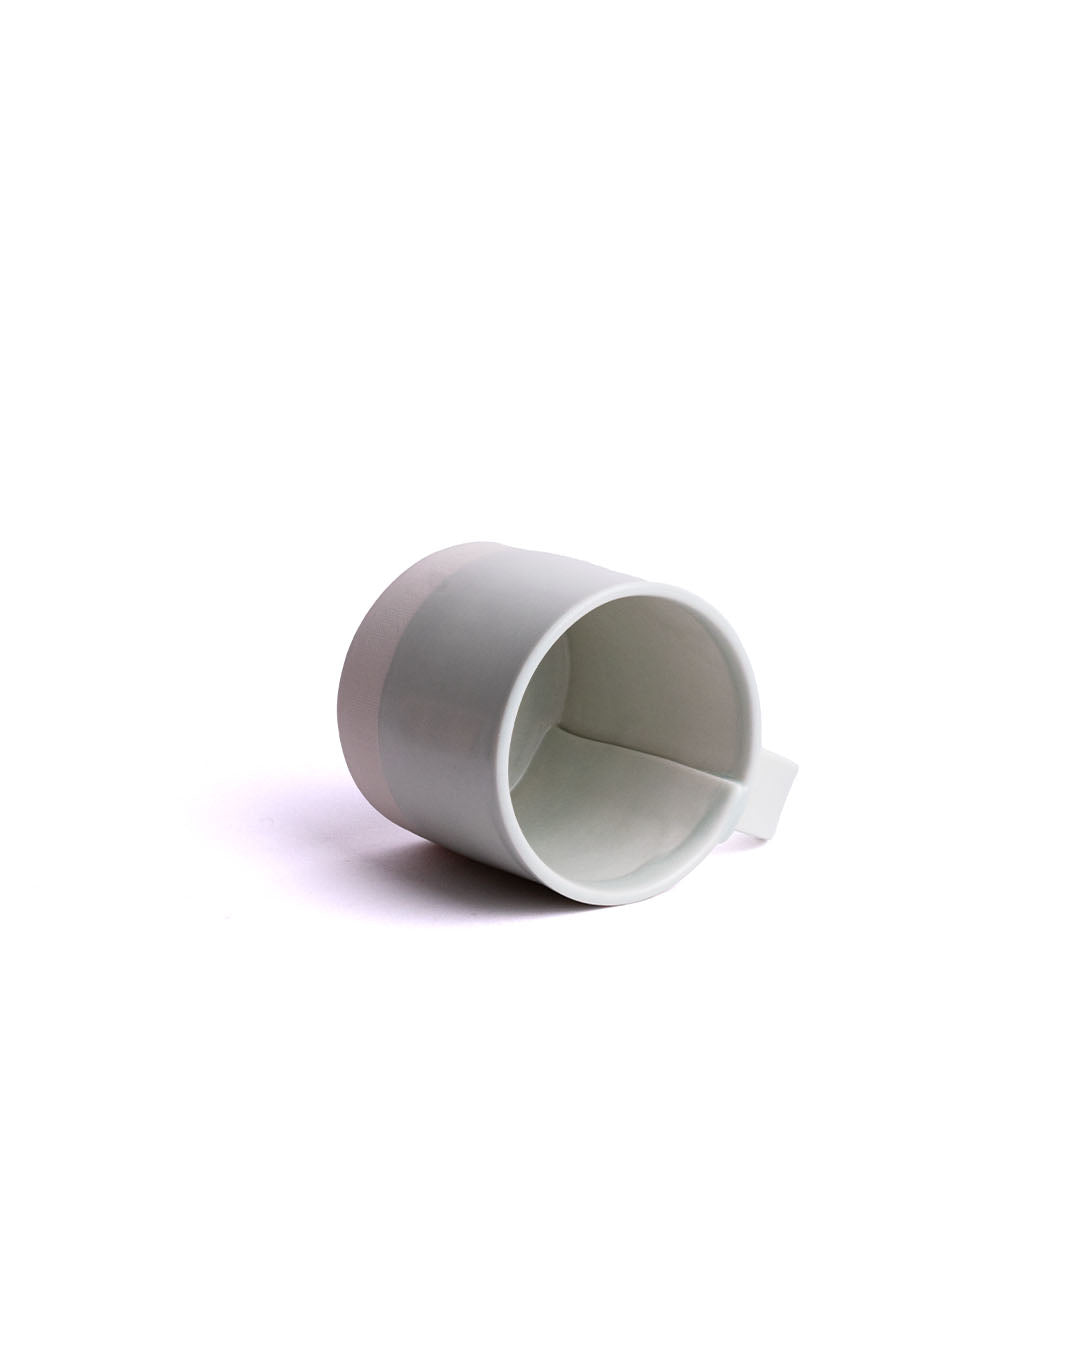 Overlapping Coffee Cup - MA Ceramiste